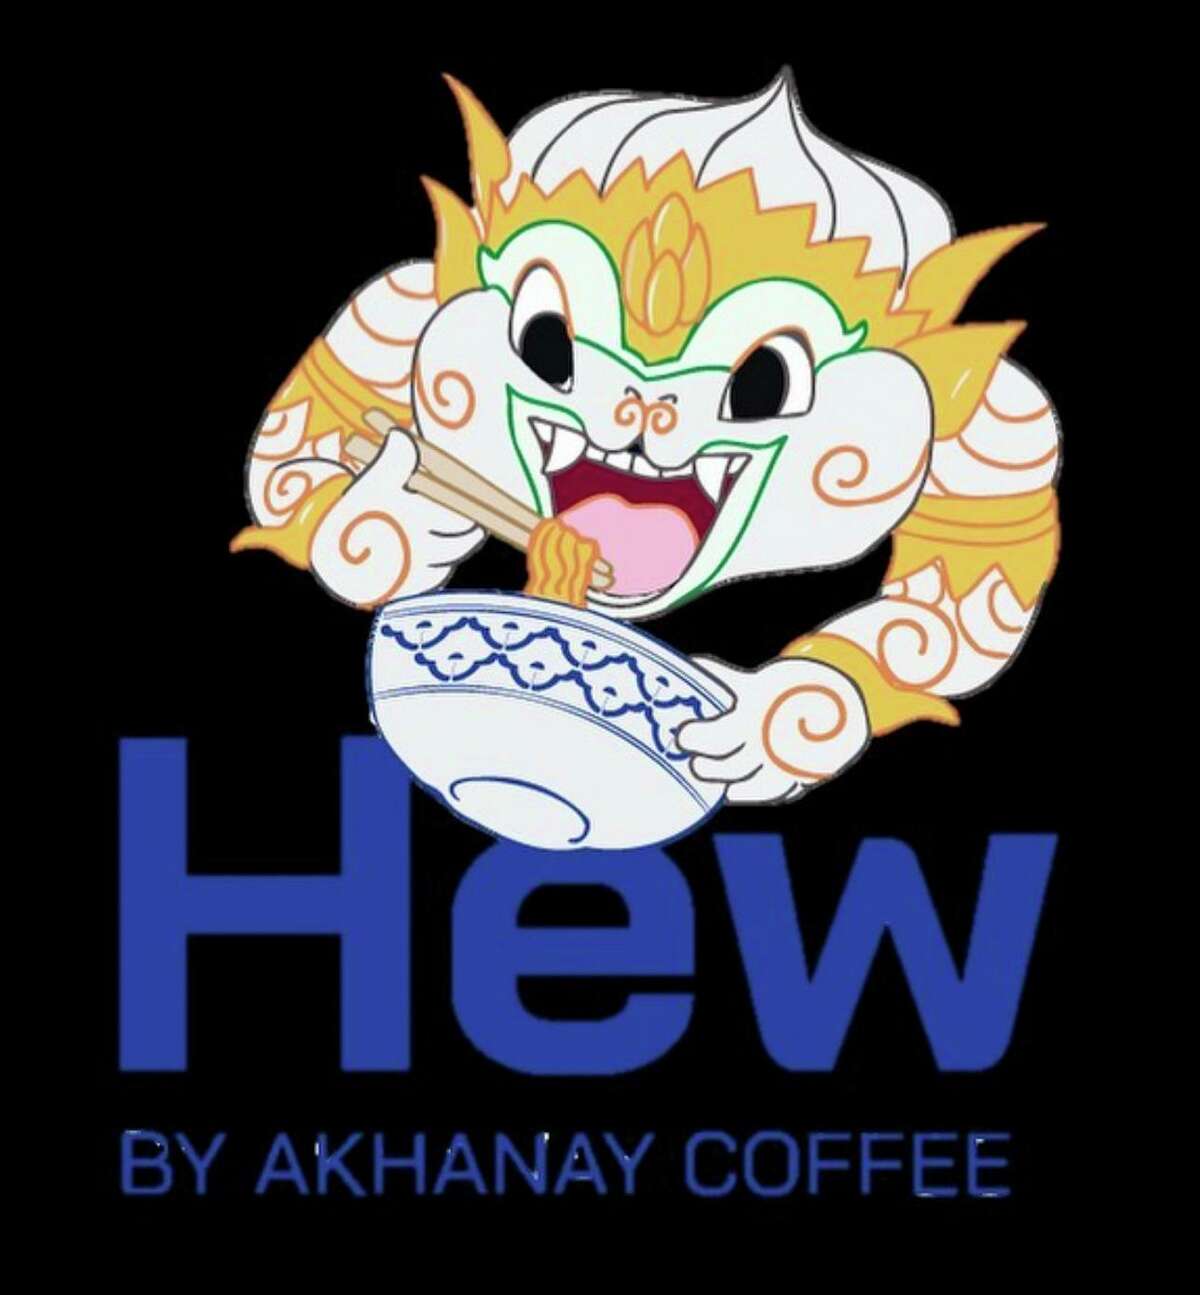 Hew by Akhanay Coffee is a new Thai curbside and delivery restaurant opening this week in San Antonio's Five Points neighborhood.